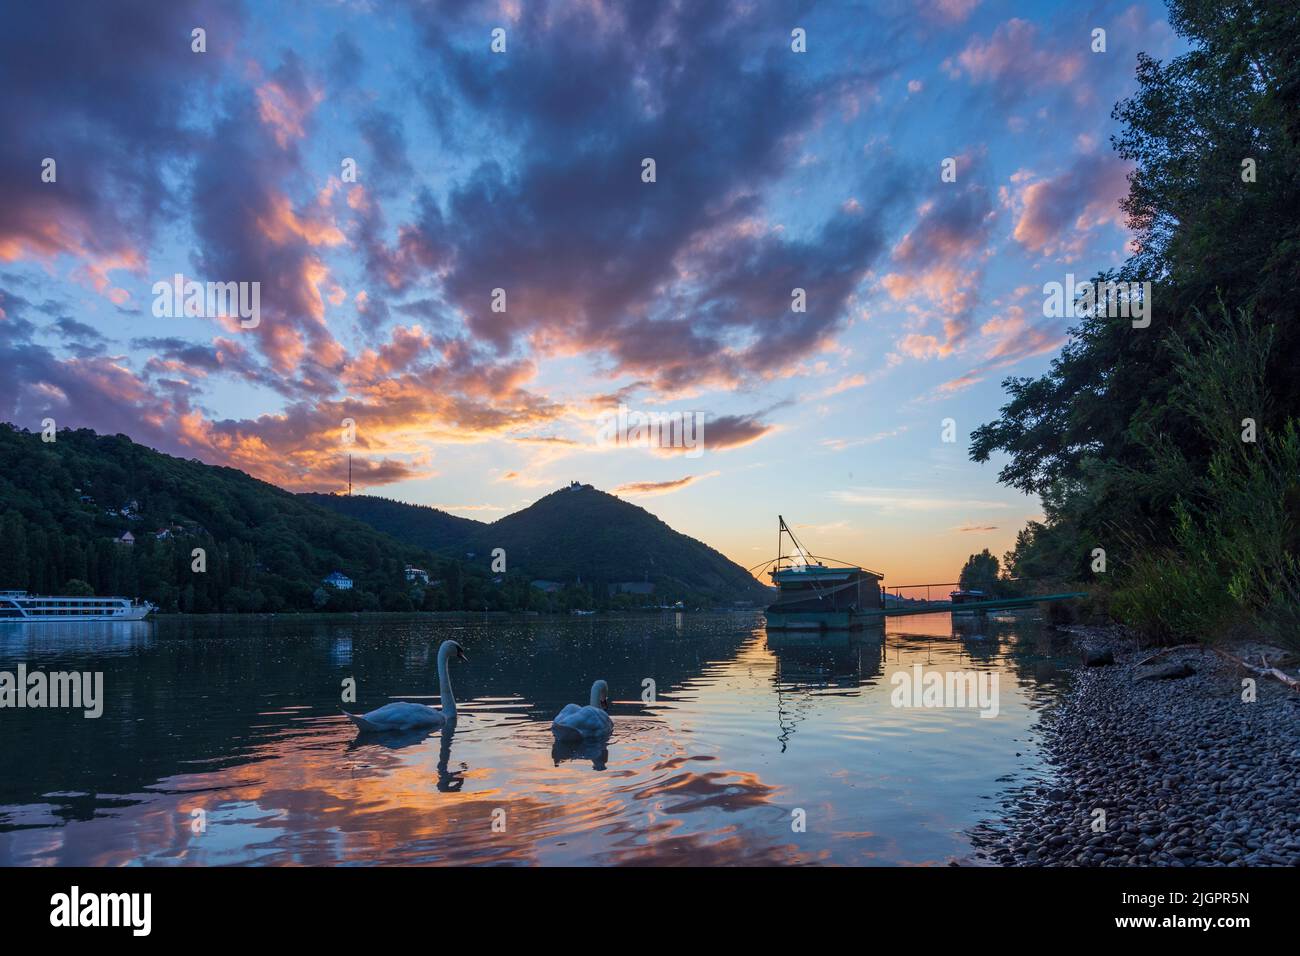 Wien, Vienna: sunset at river Donau (Danube), view to mountain Kahlenberg (left) and Leopoldsberg (with church), Daubel boat with lifting fishing net, Stock Photo